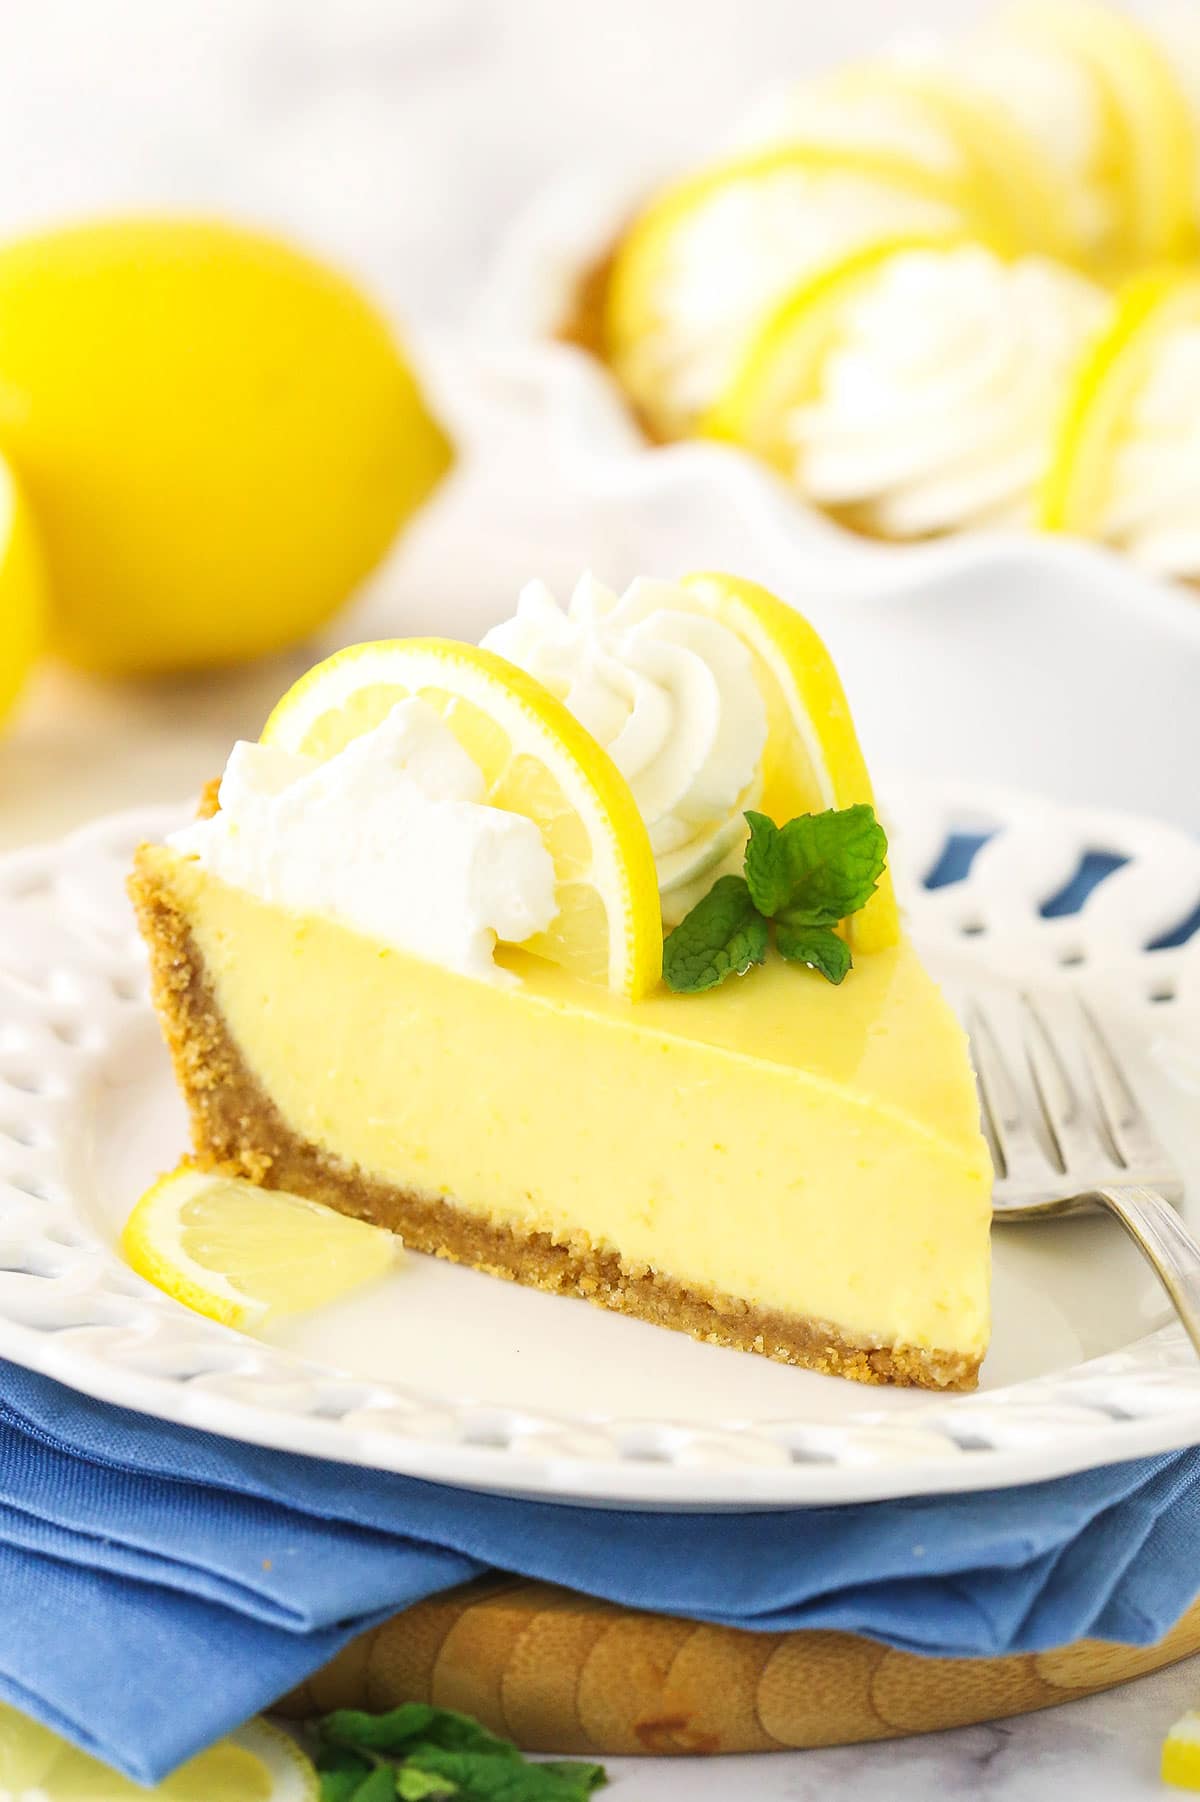 A piece of lemon pie on a dessert plate with a metal fork beside it